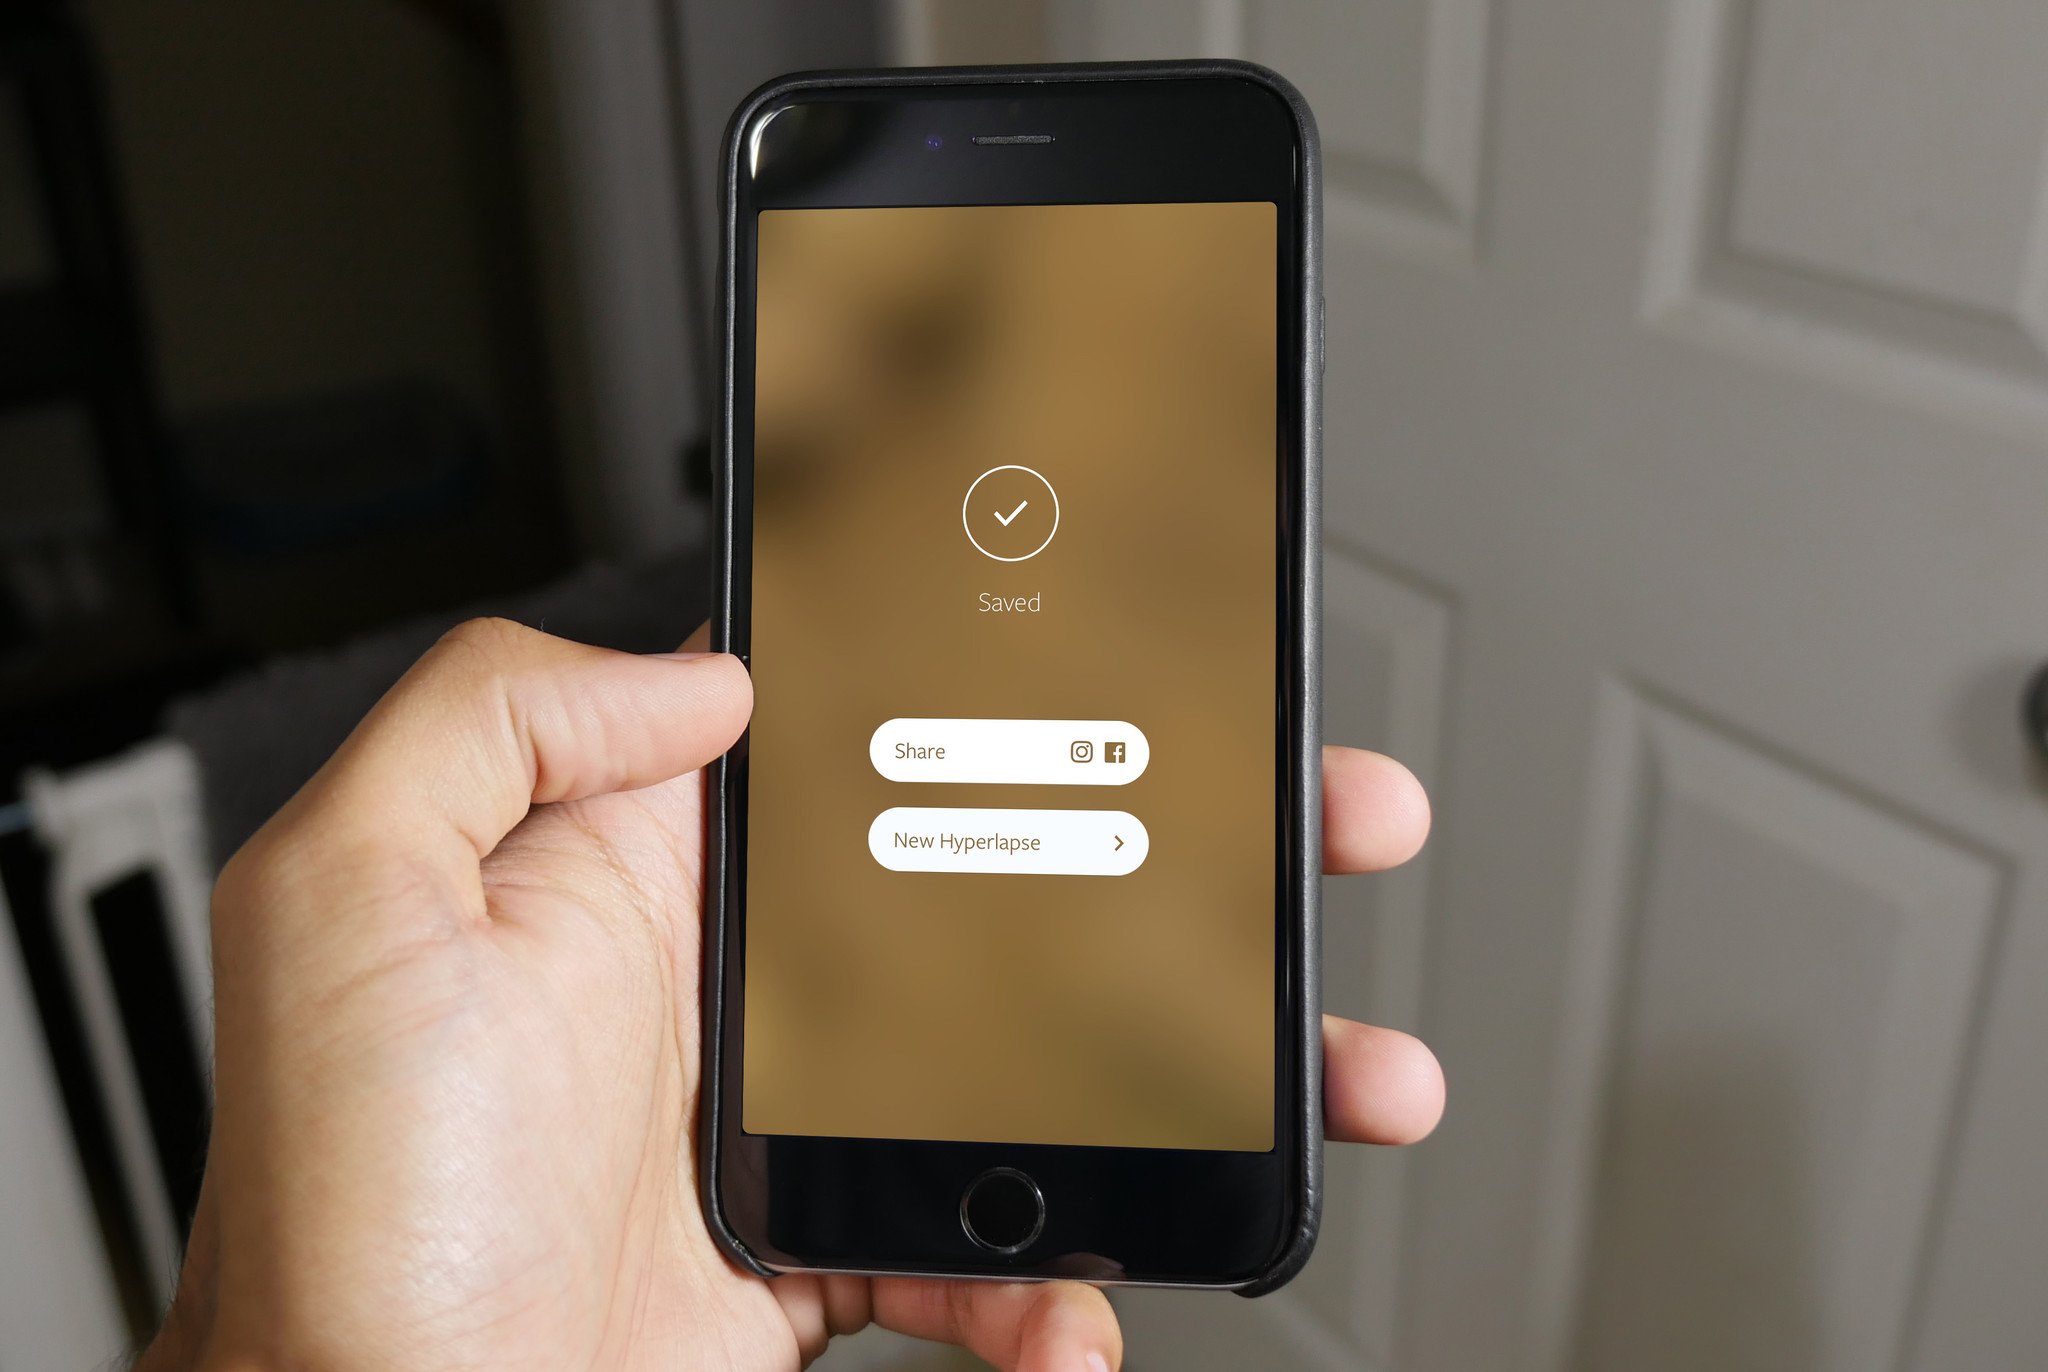 An iPhone 6s Plus is shown with the save screen dialogue in Hyperlapse.